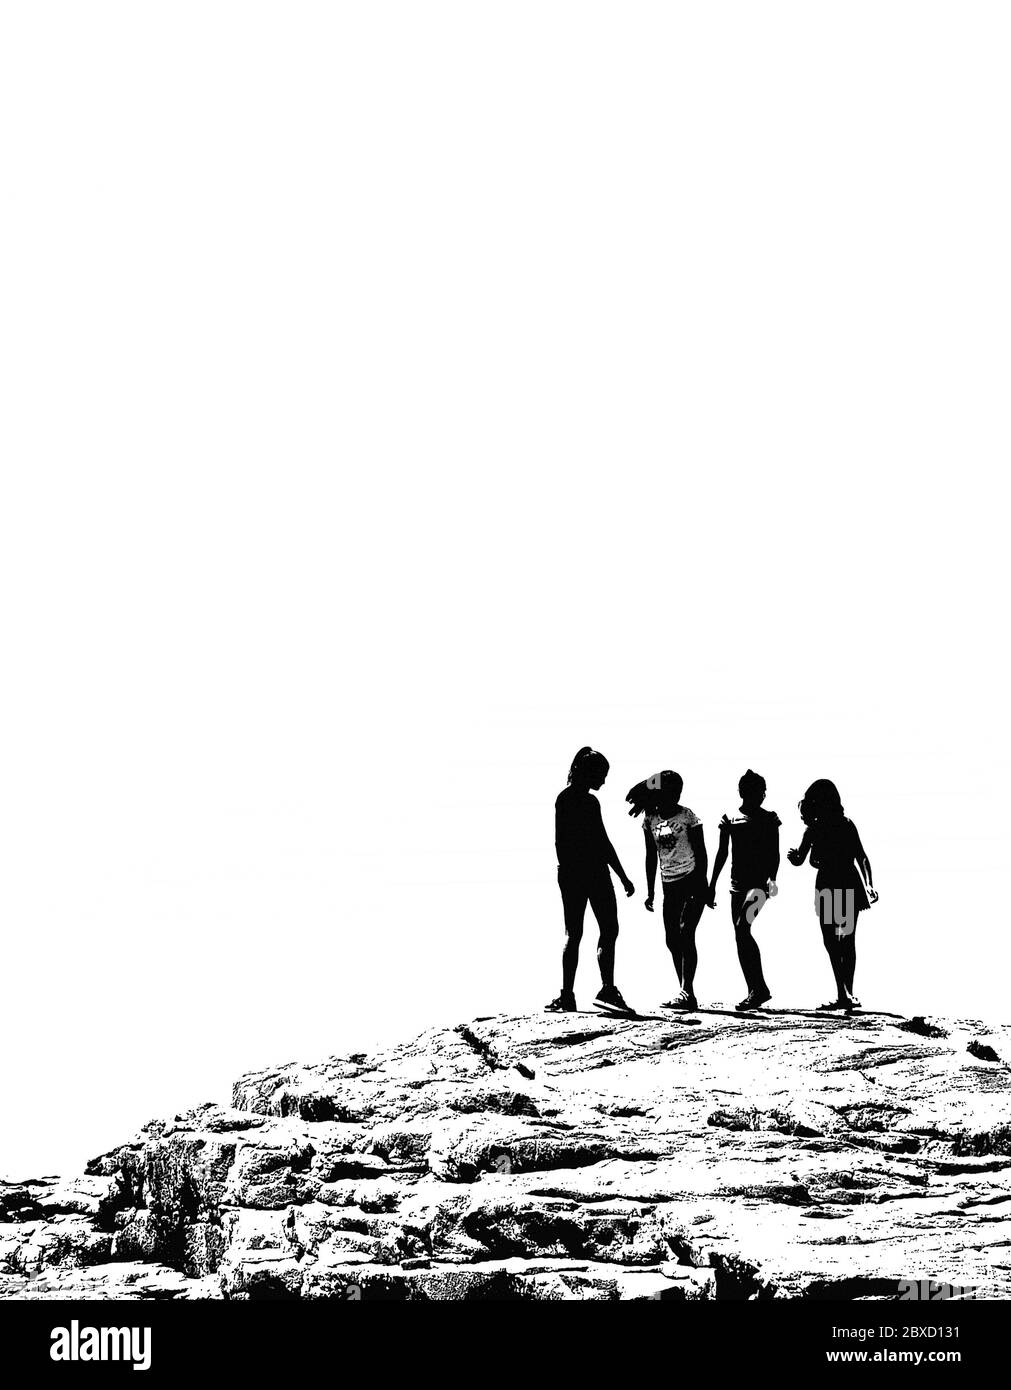 Silhouette of four girls on a large rock. Stock Photo